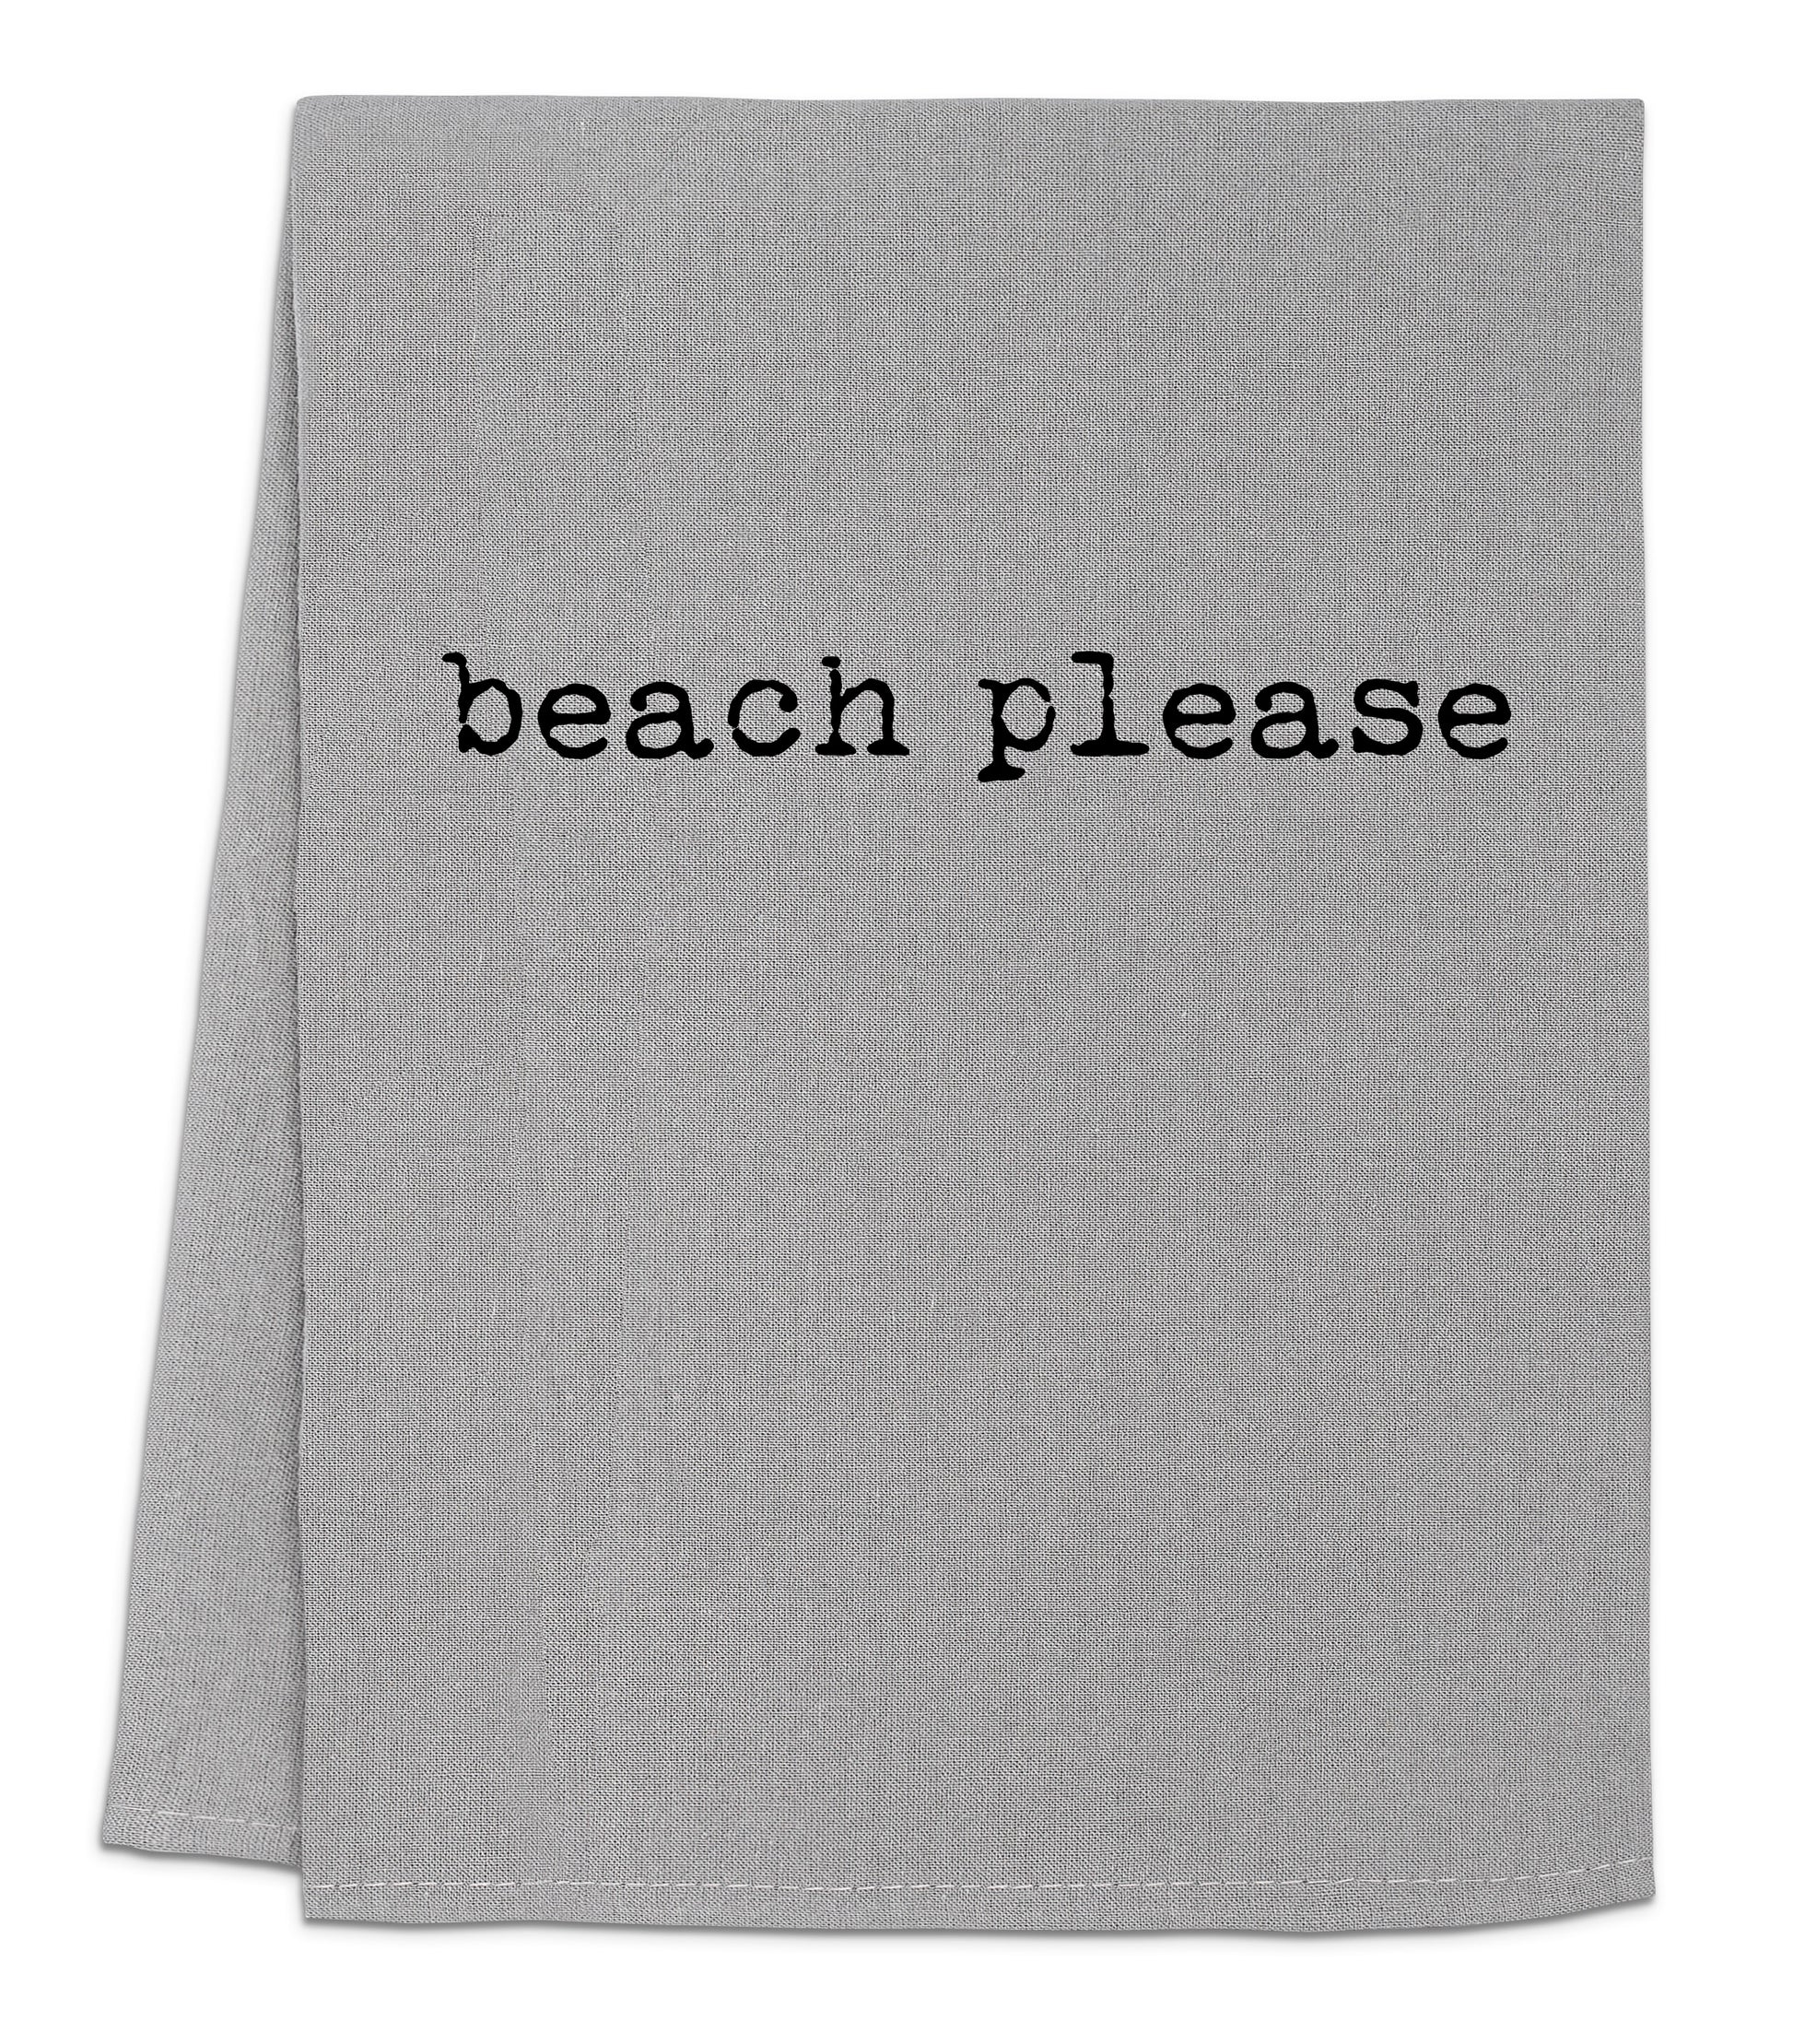 a towel with the word beach please printed on it